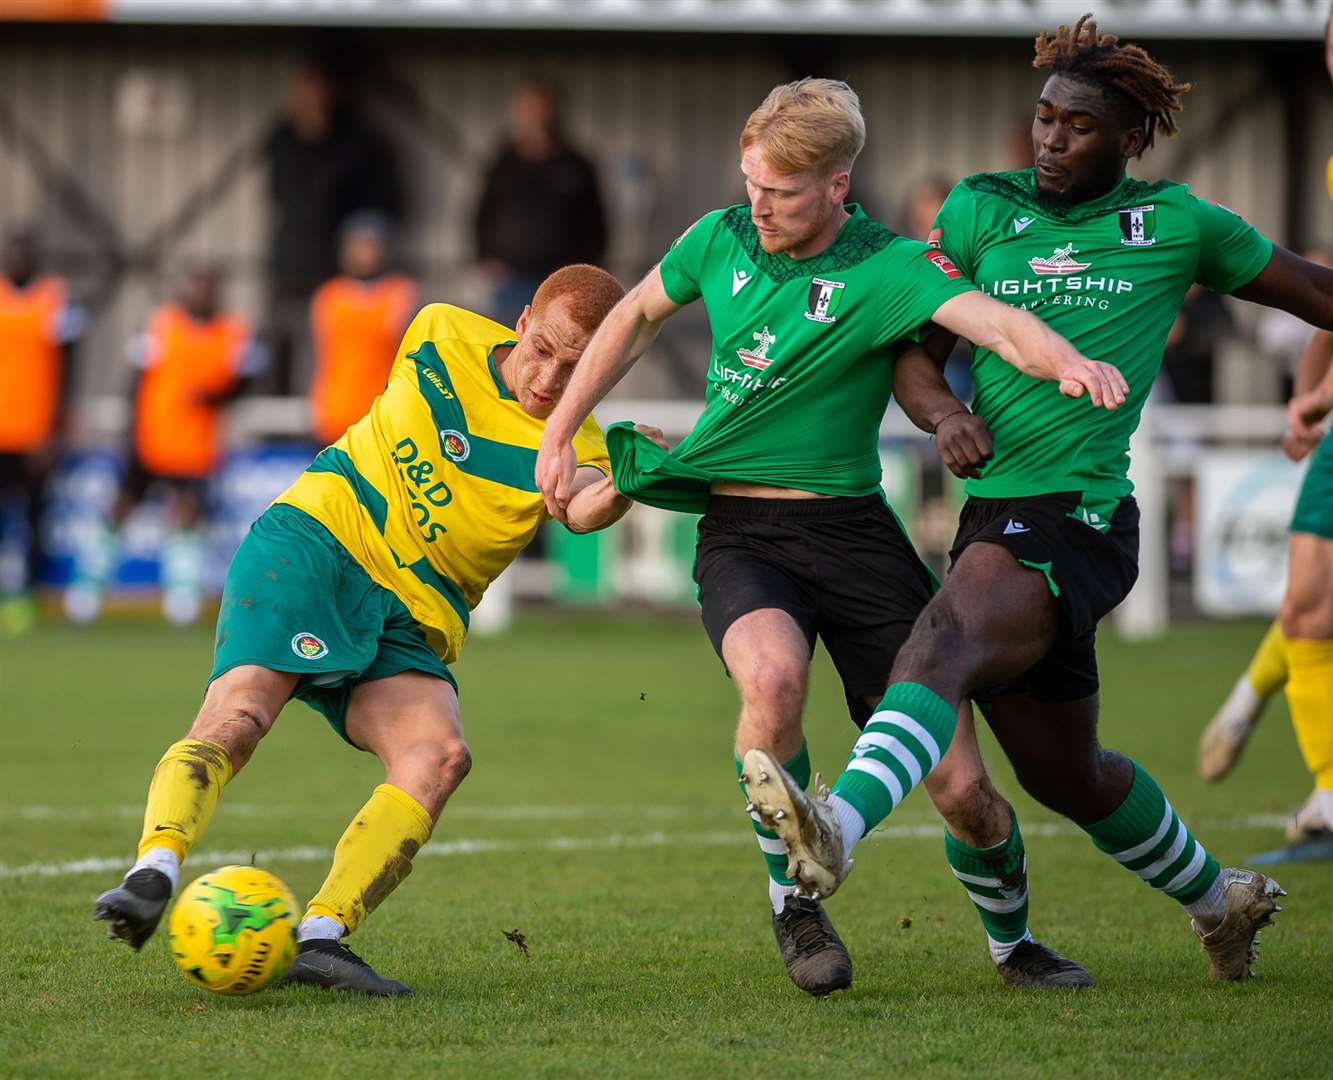 Ashford United forward Tashi Jay-Kwayie is outnumbered as he tries to get a shot away Picture: Ian Scammell